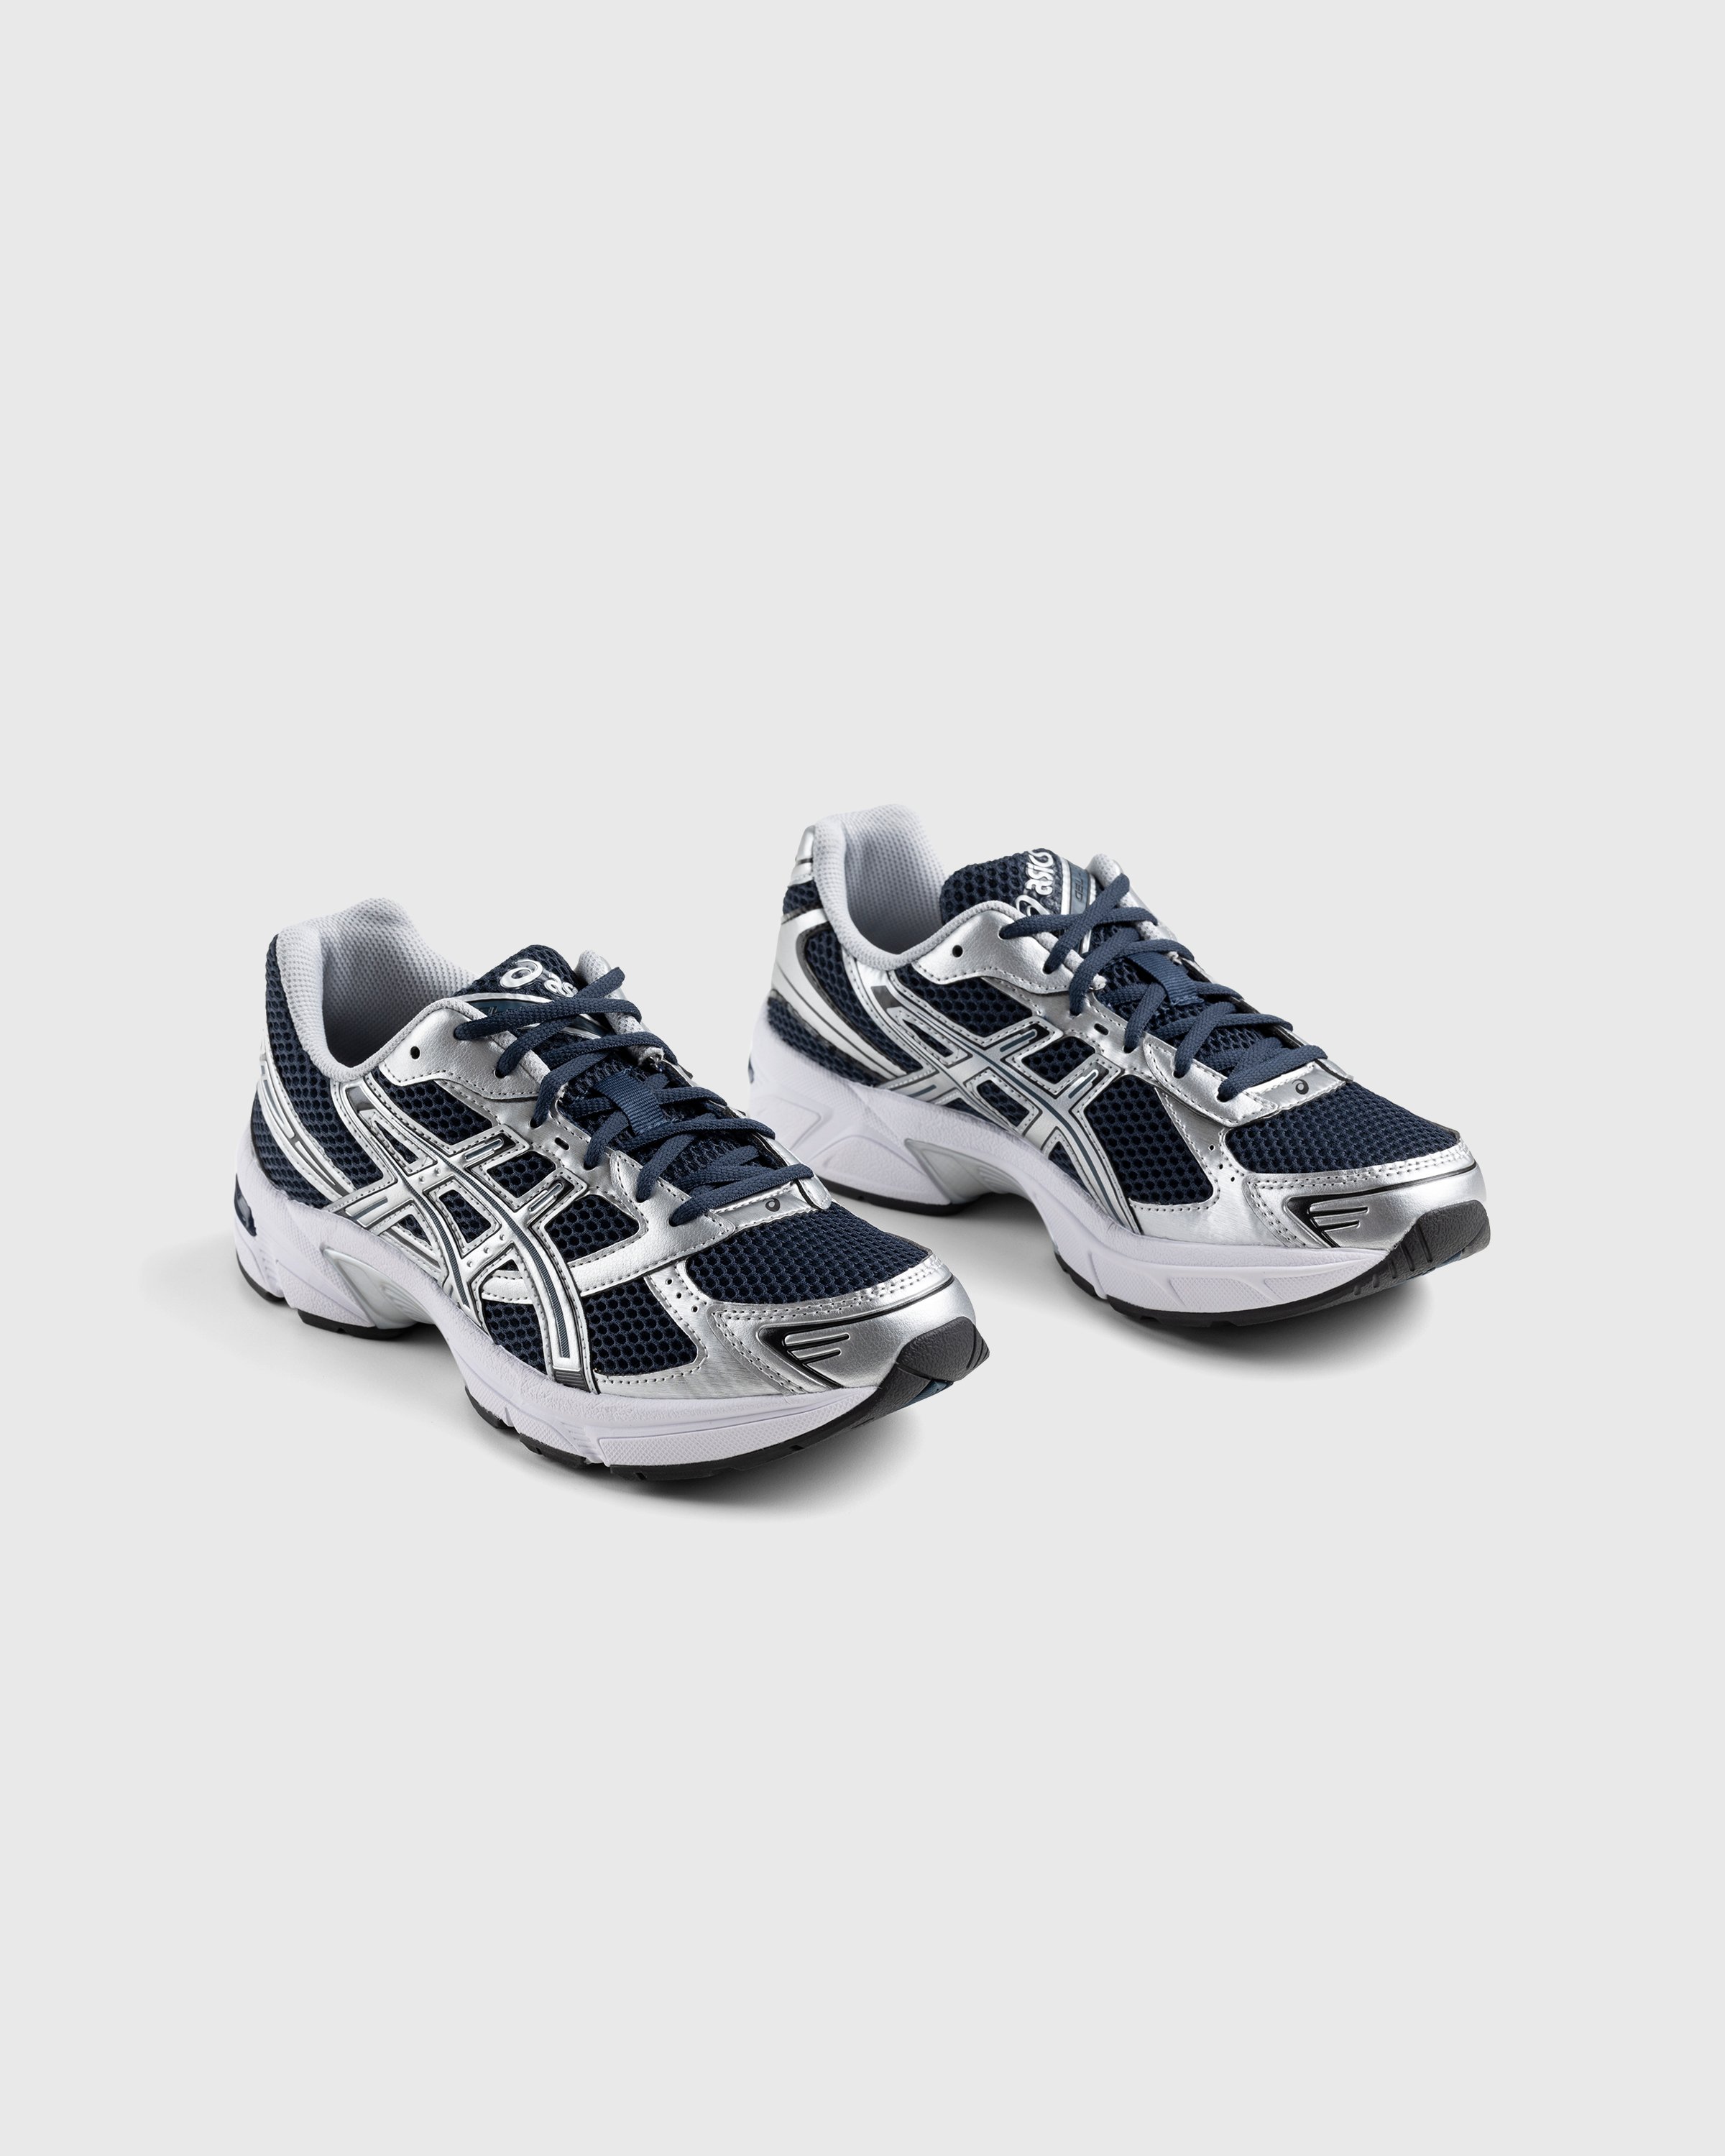 asics - GEL-1130 French Blue/Pure Silver - Footwear - Blue - Image 3